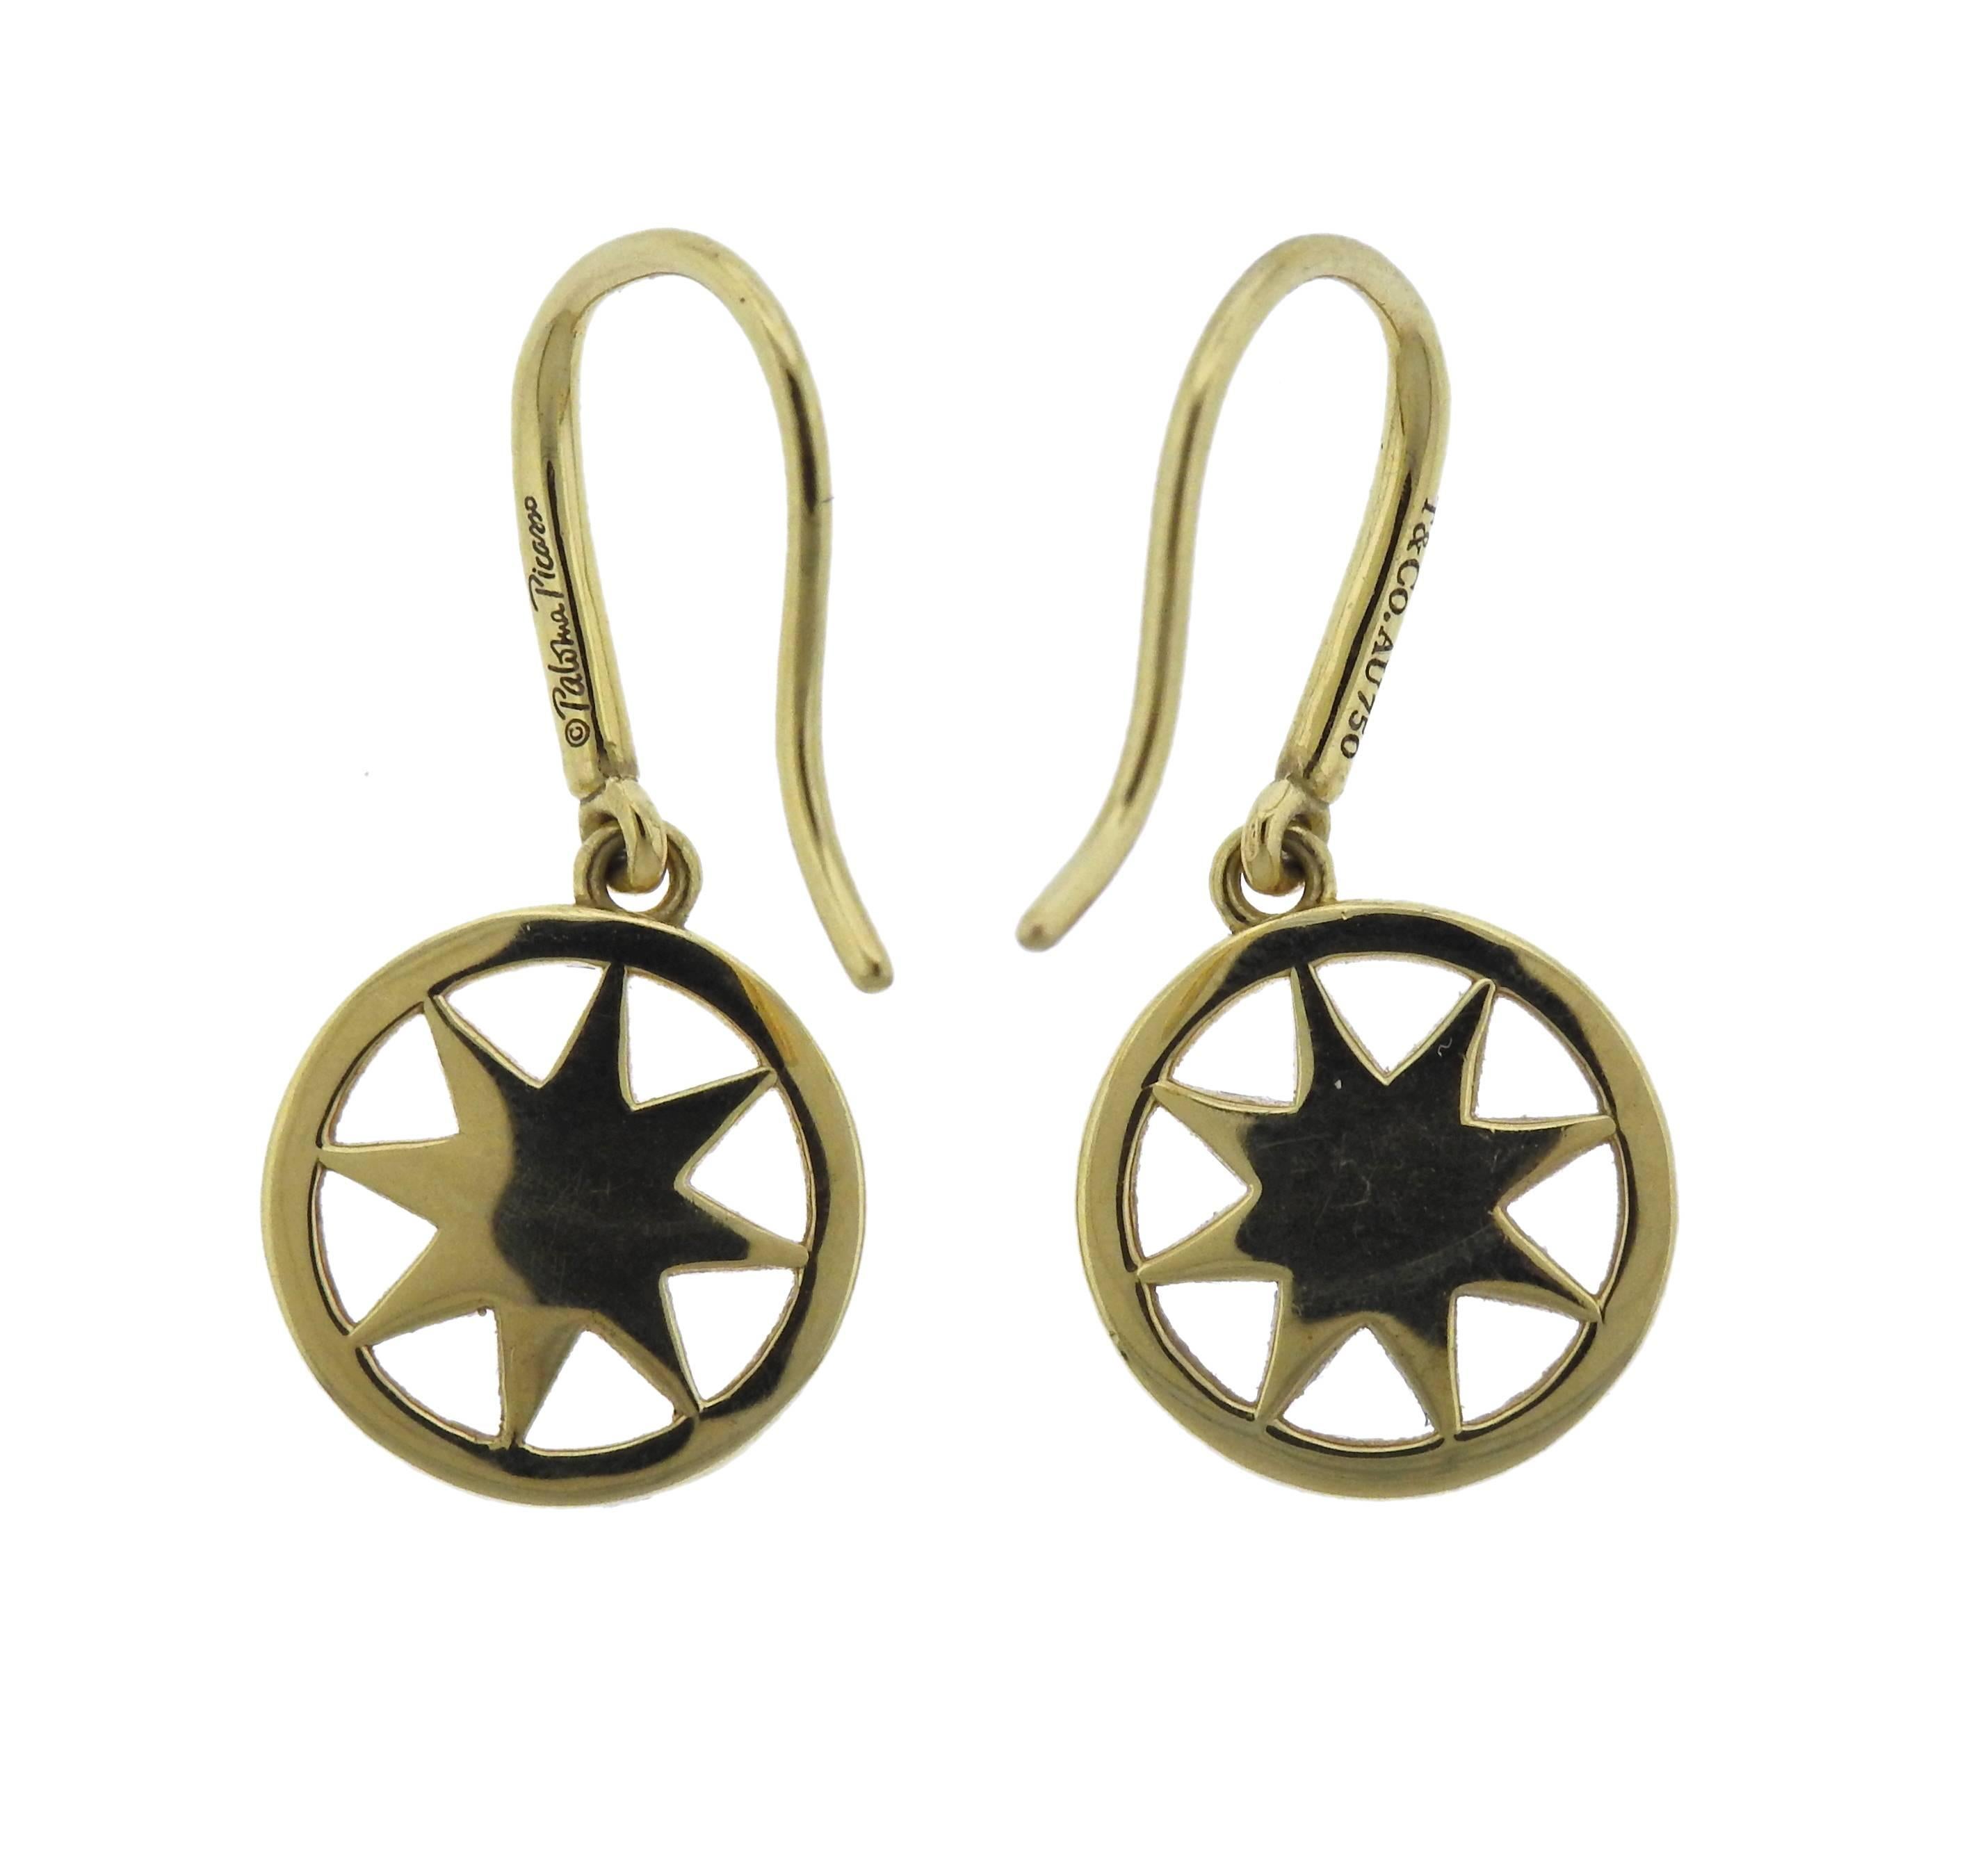  Pair of 18k yellow gold star drop earrings, crafted by Paloma Picasso for Tiffany & Co, set with approx. 0.16ctw in G/VS diamonds. Earrings are 25mm long, bottom circles - 11.1mm in diameter, weigh 4 grams. Marked:  T & Co, Au750, Paloma Picasso.